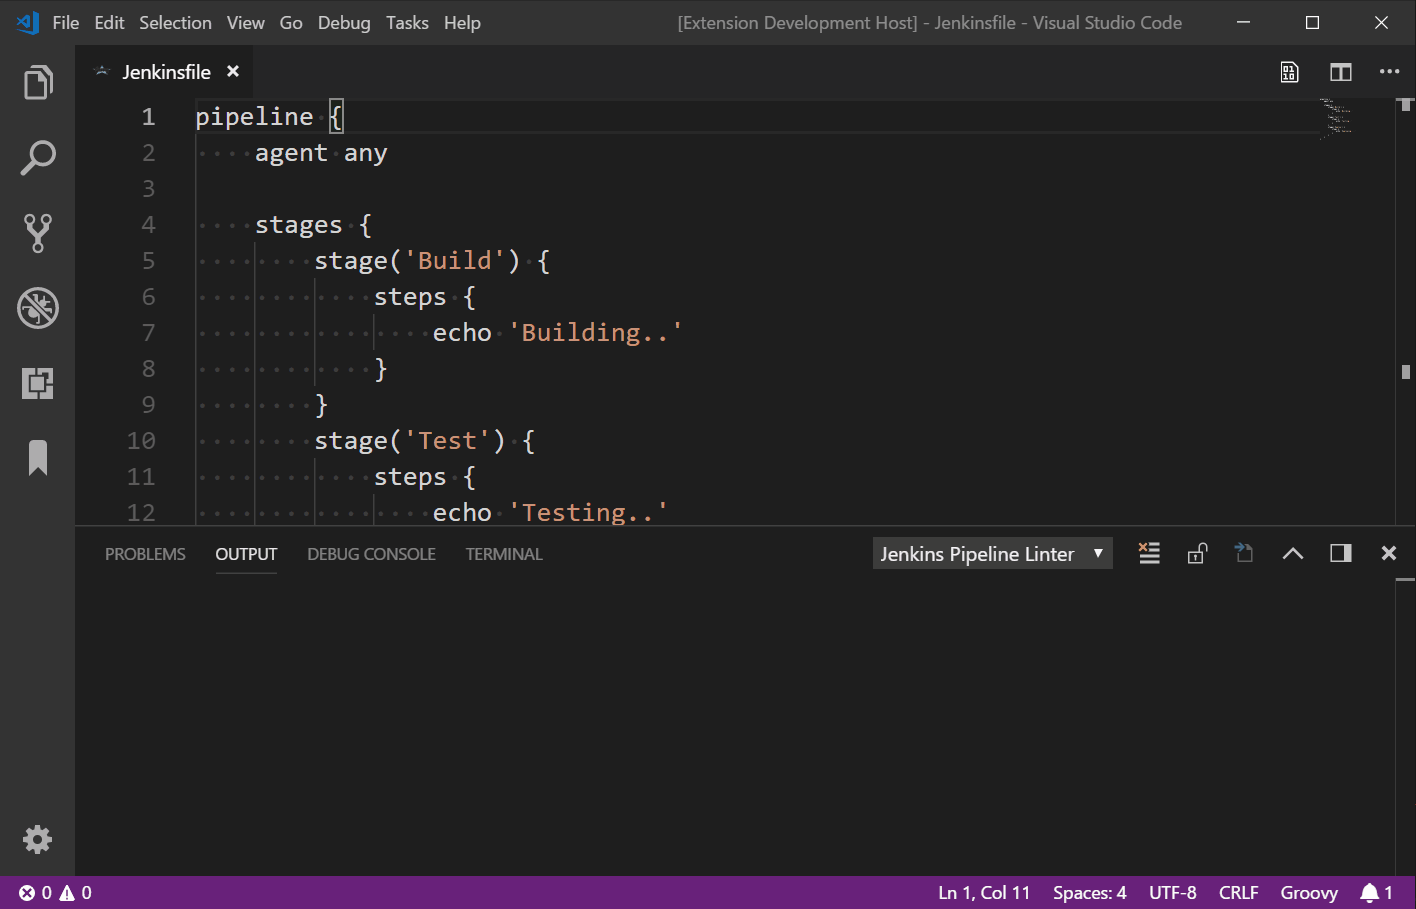 https://github.com/yeshan333/vscode-jenkins-pipeline-linter-connector/raw/master/images/example_with_syntax_error.gif